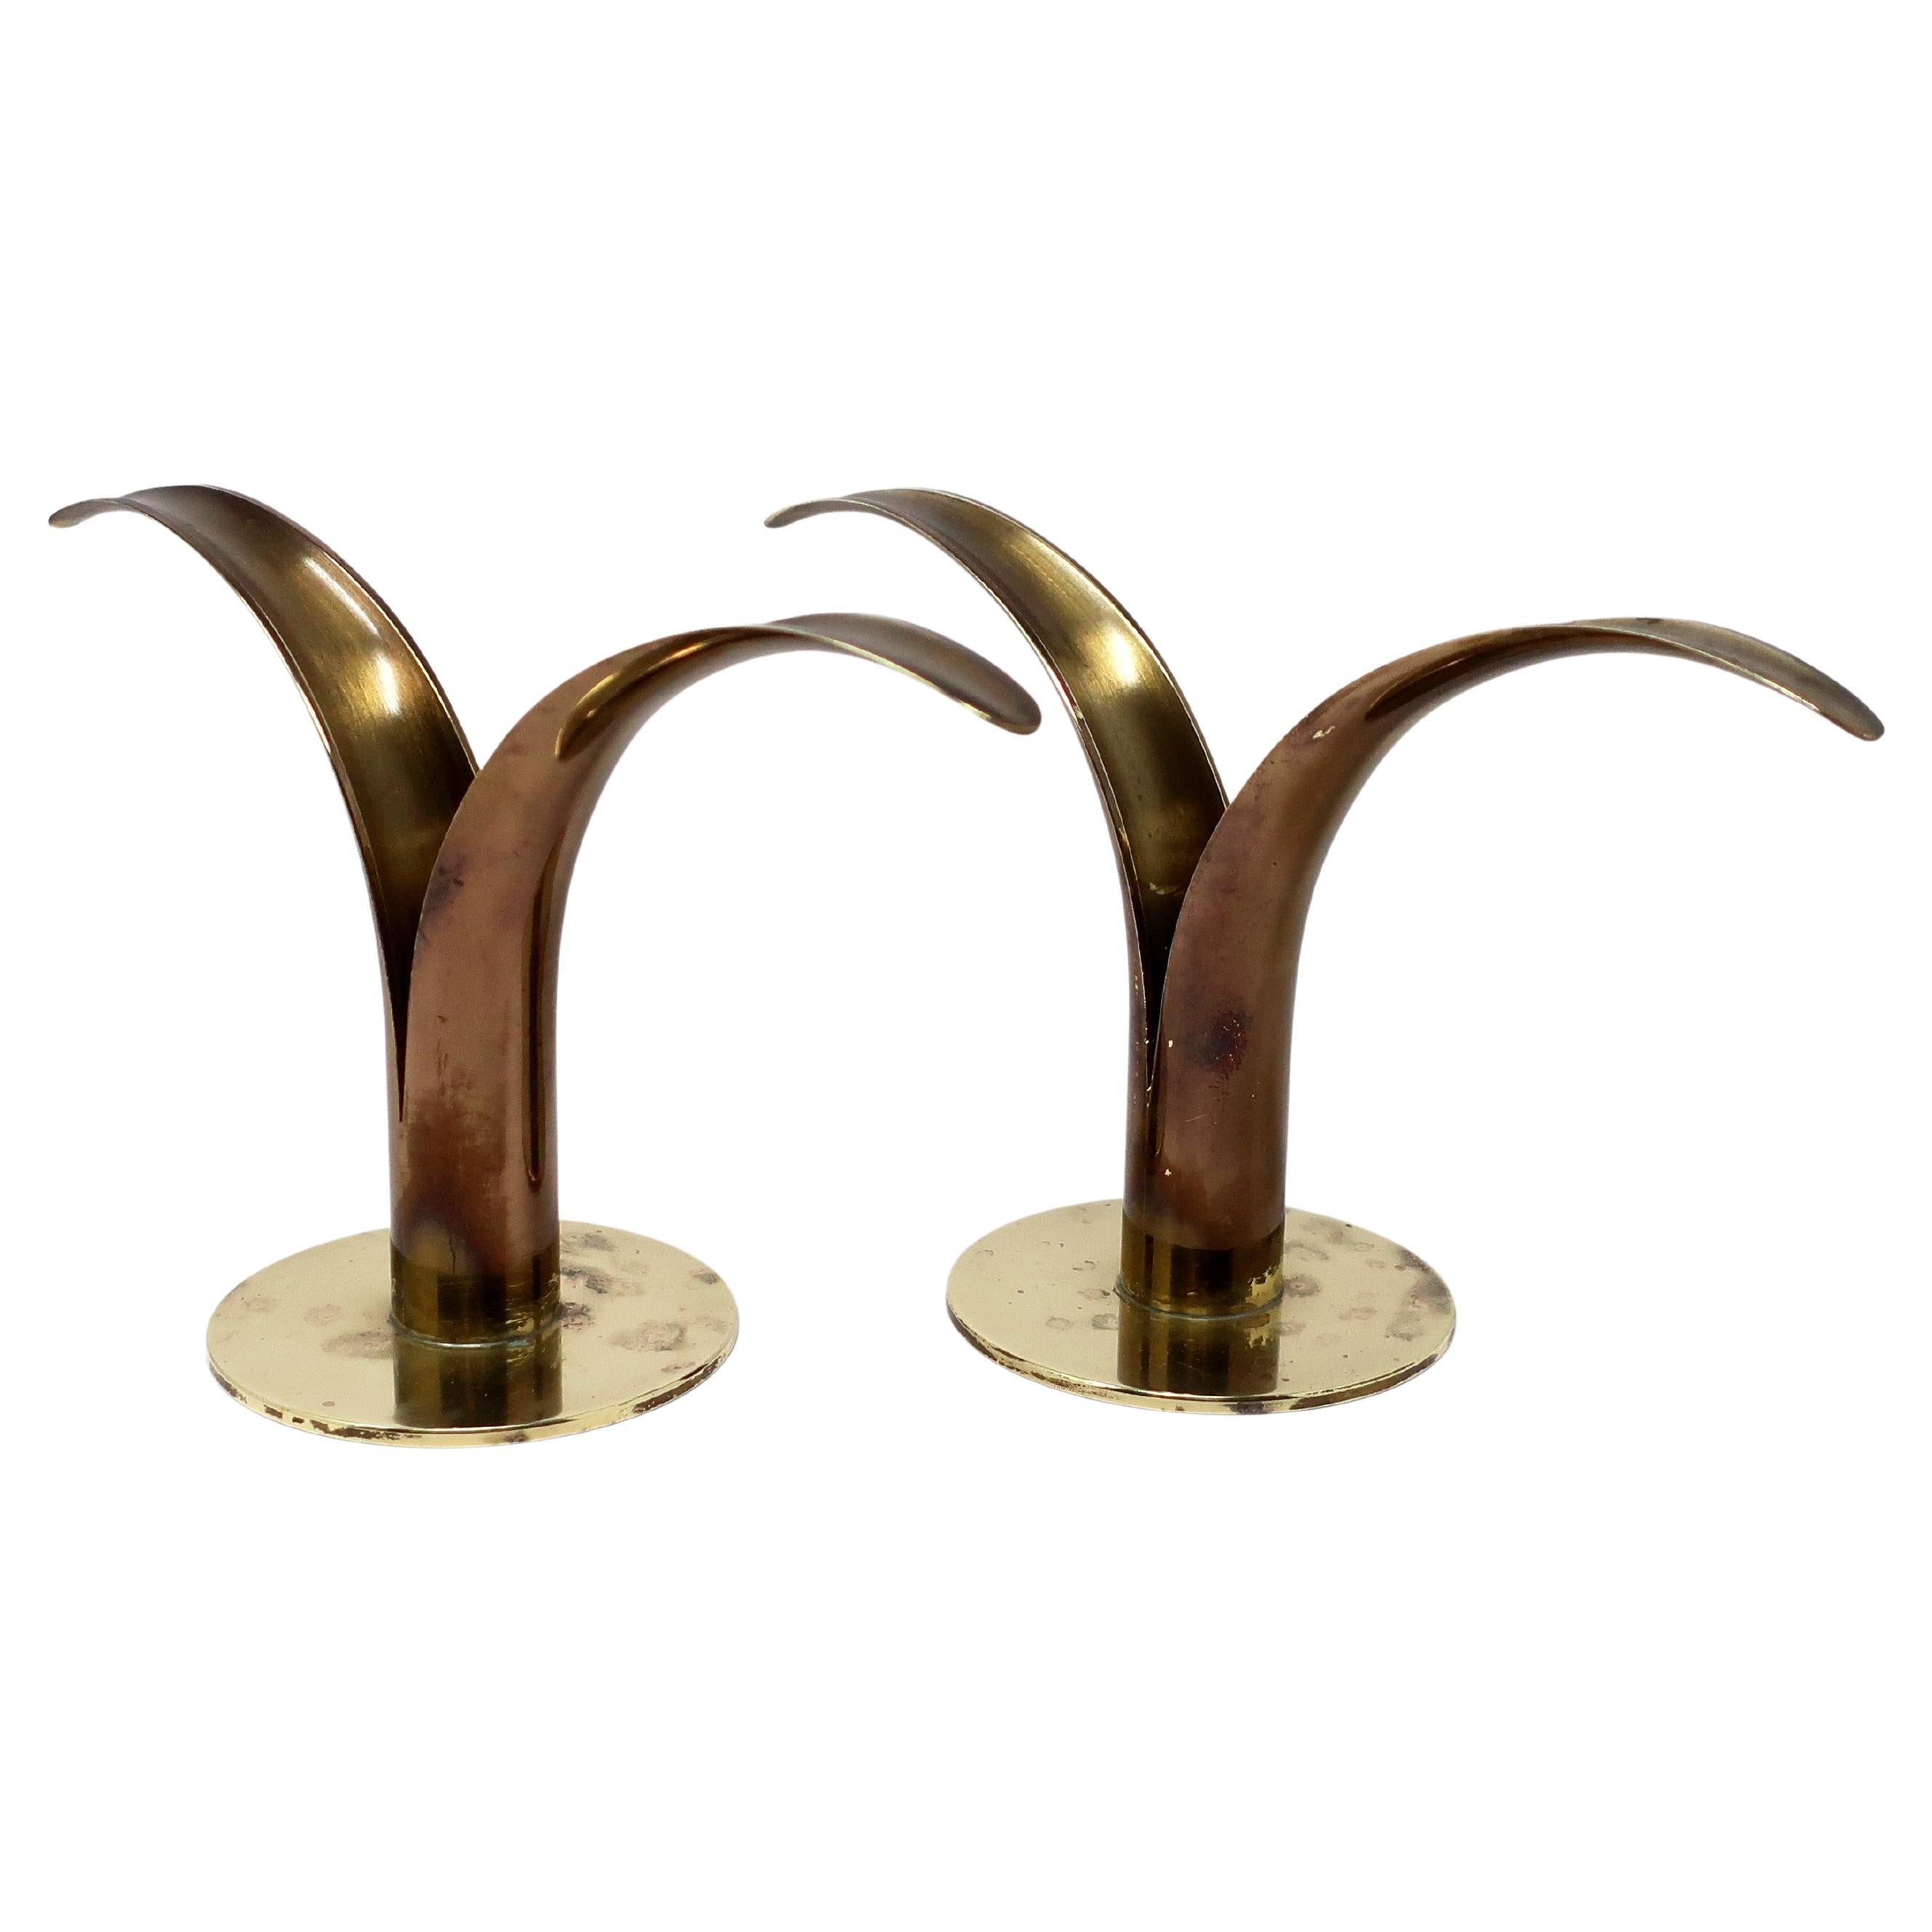 A pair of Scandinavian Modern brass Lily / Liljan candlesticks designed by Ivar Ahlenius Bjork for Ystad Metall in Sweden and irst exhibited in the US at the Scandinavian Pavilion of 1939 New York World's Fair.  

In vintage condition with patina